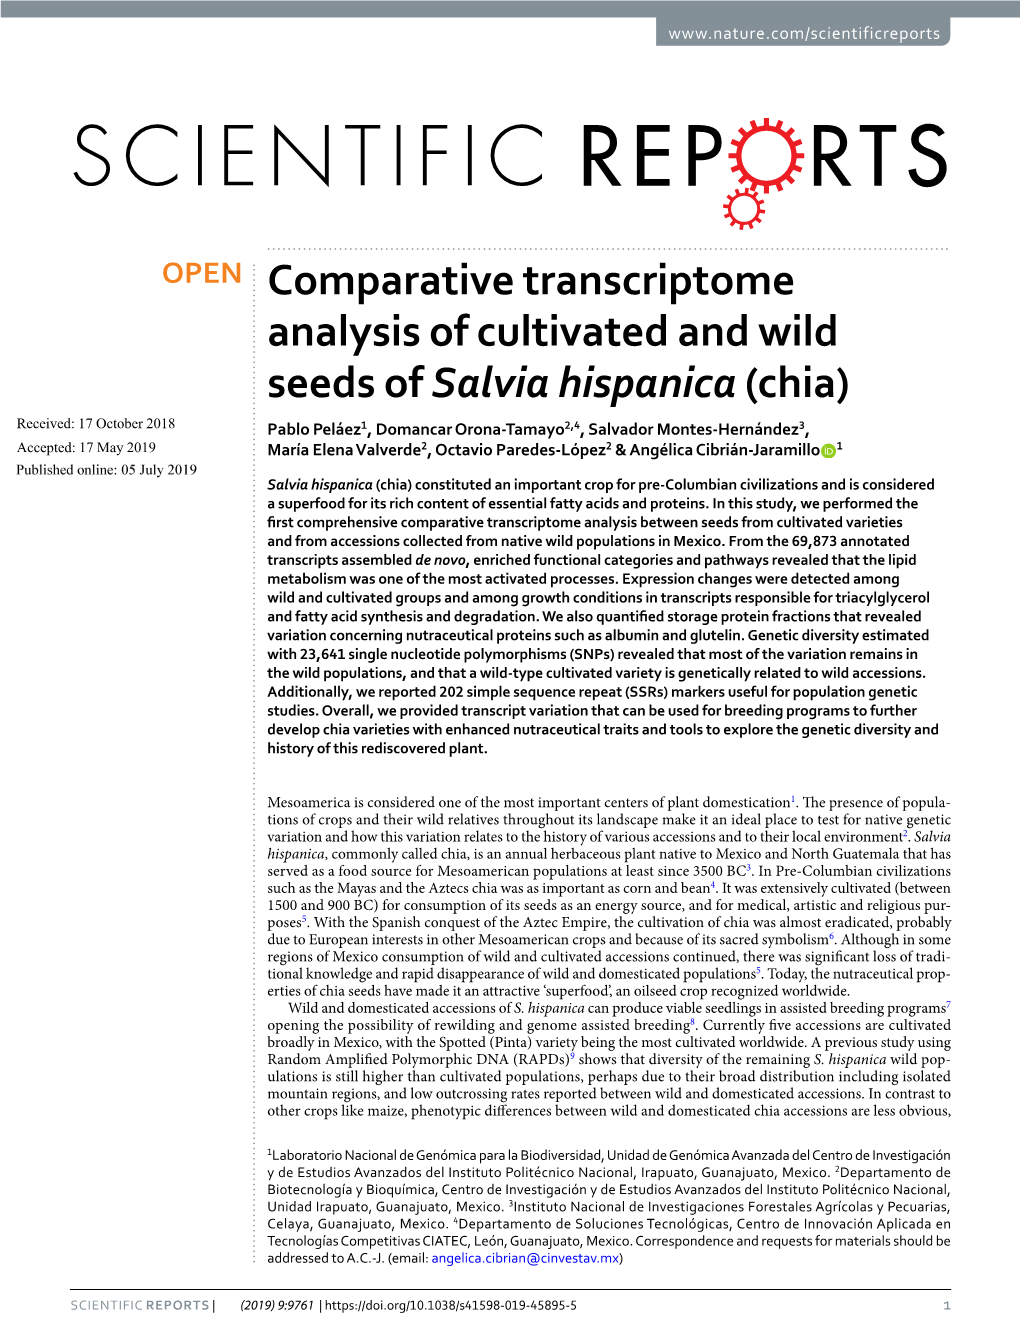 Comparative Transcriptome Analysis of Cultivated and Wild Seeds of Salvia